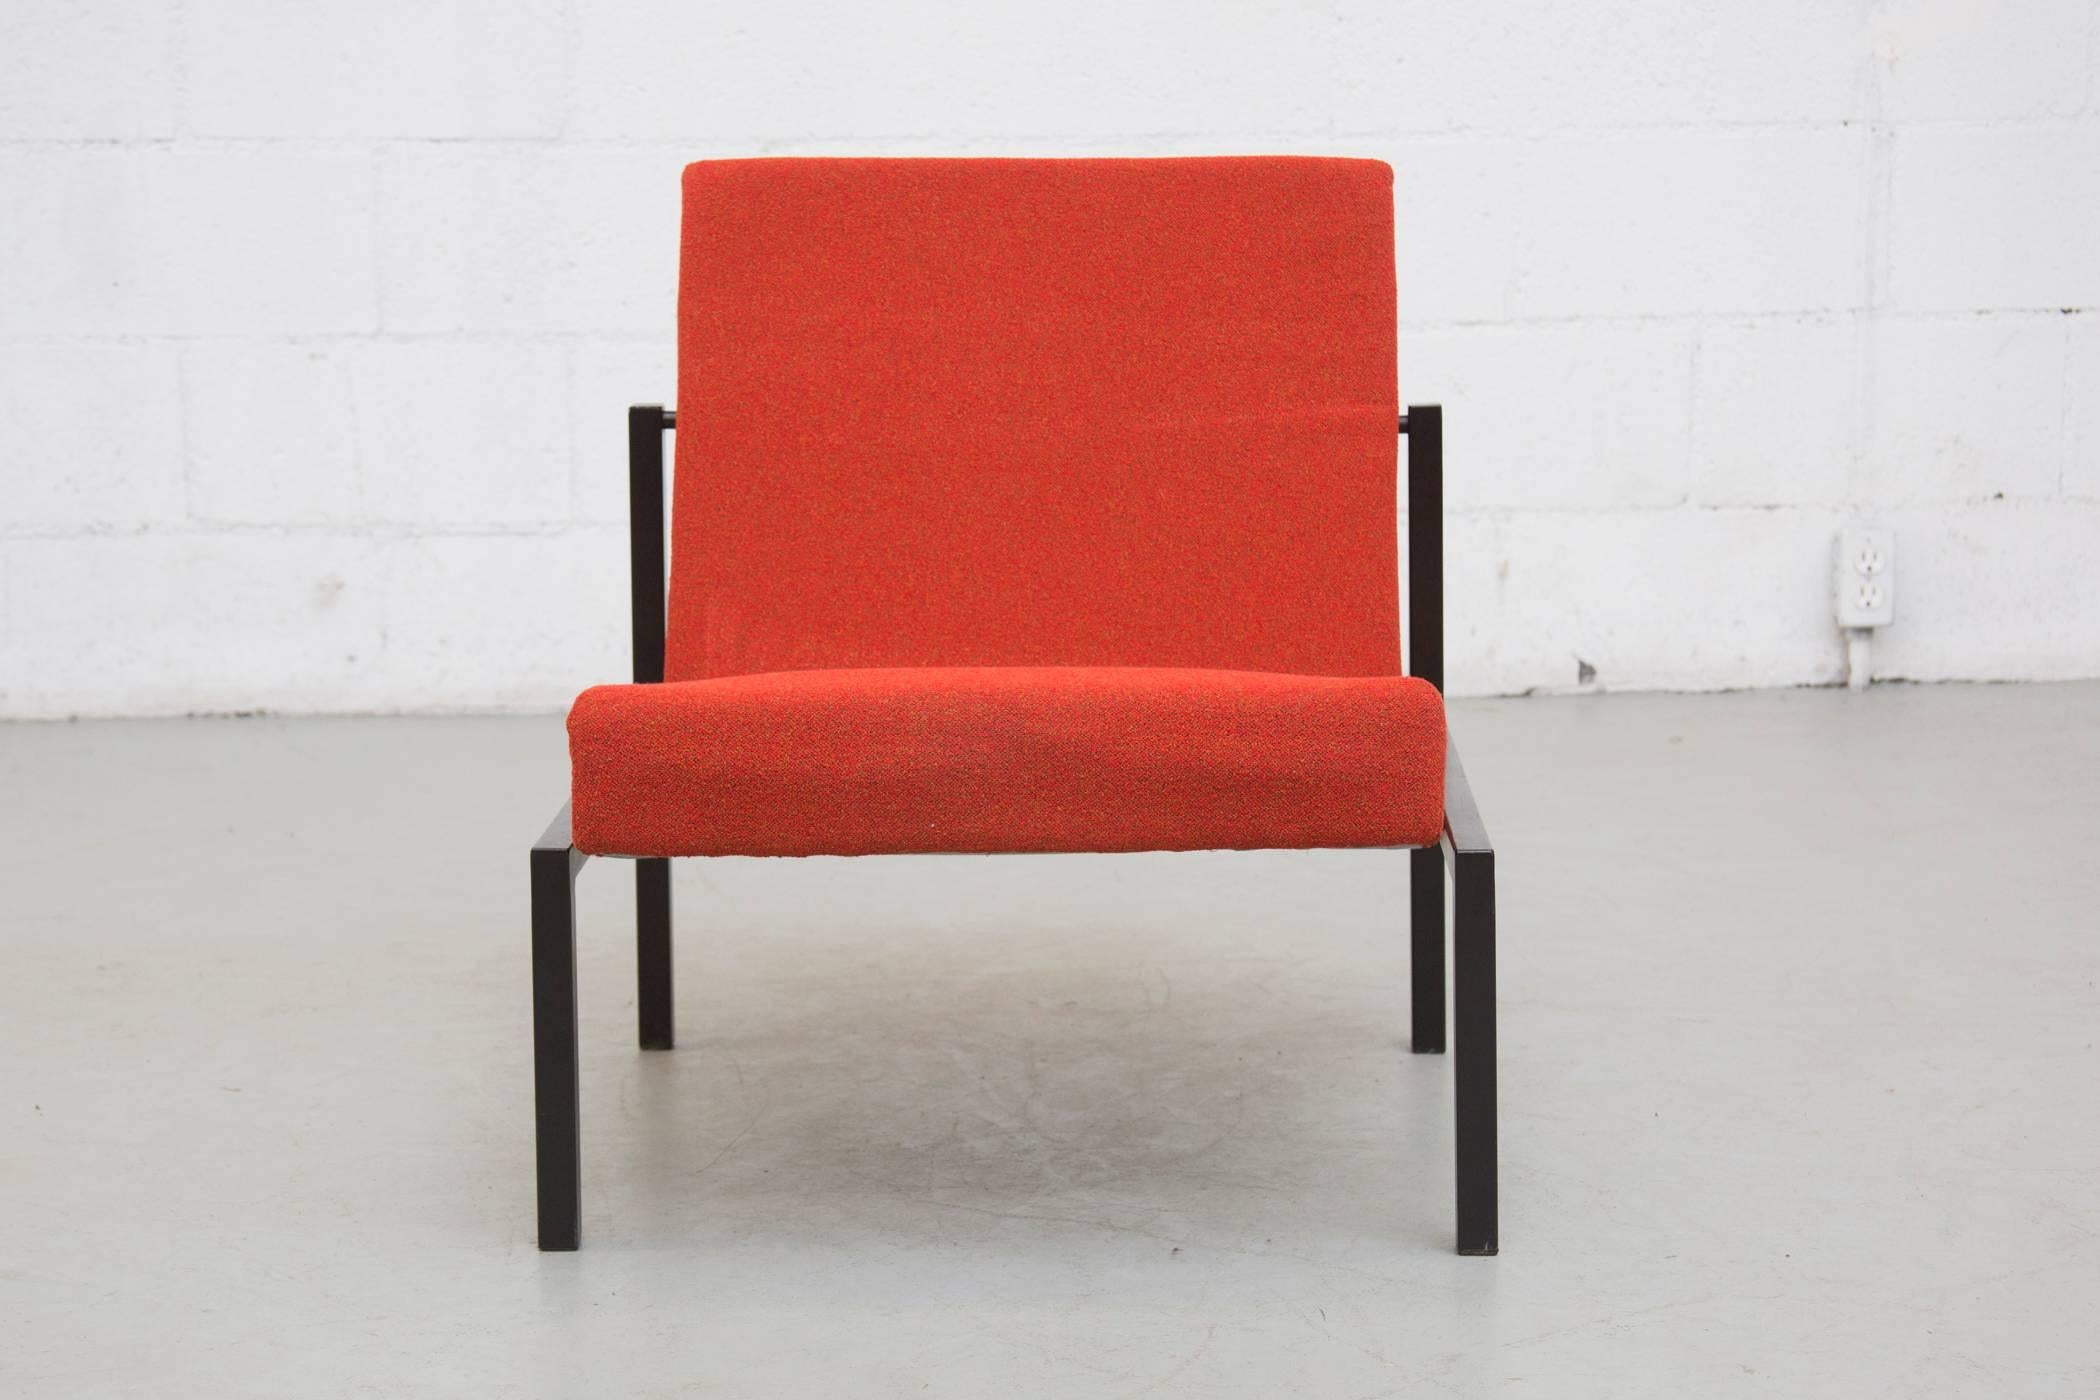 Stunning Martin Visser armless lounge chair with tomato red fabric and original black enameled metal frame. Visible signs of wear on frame.